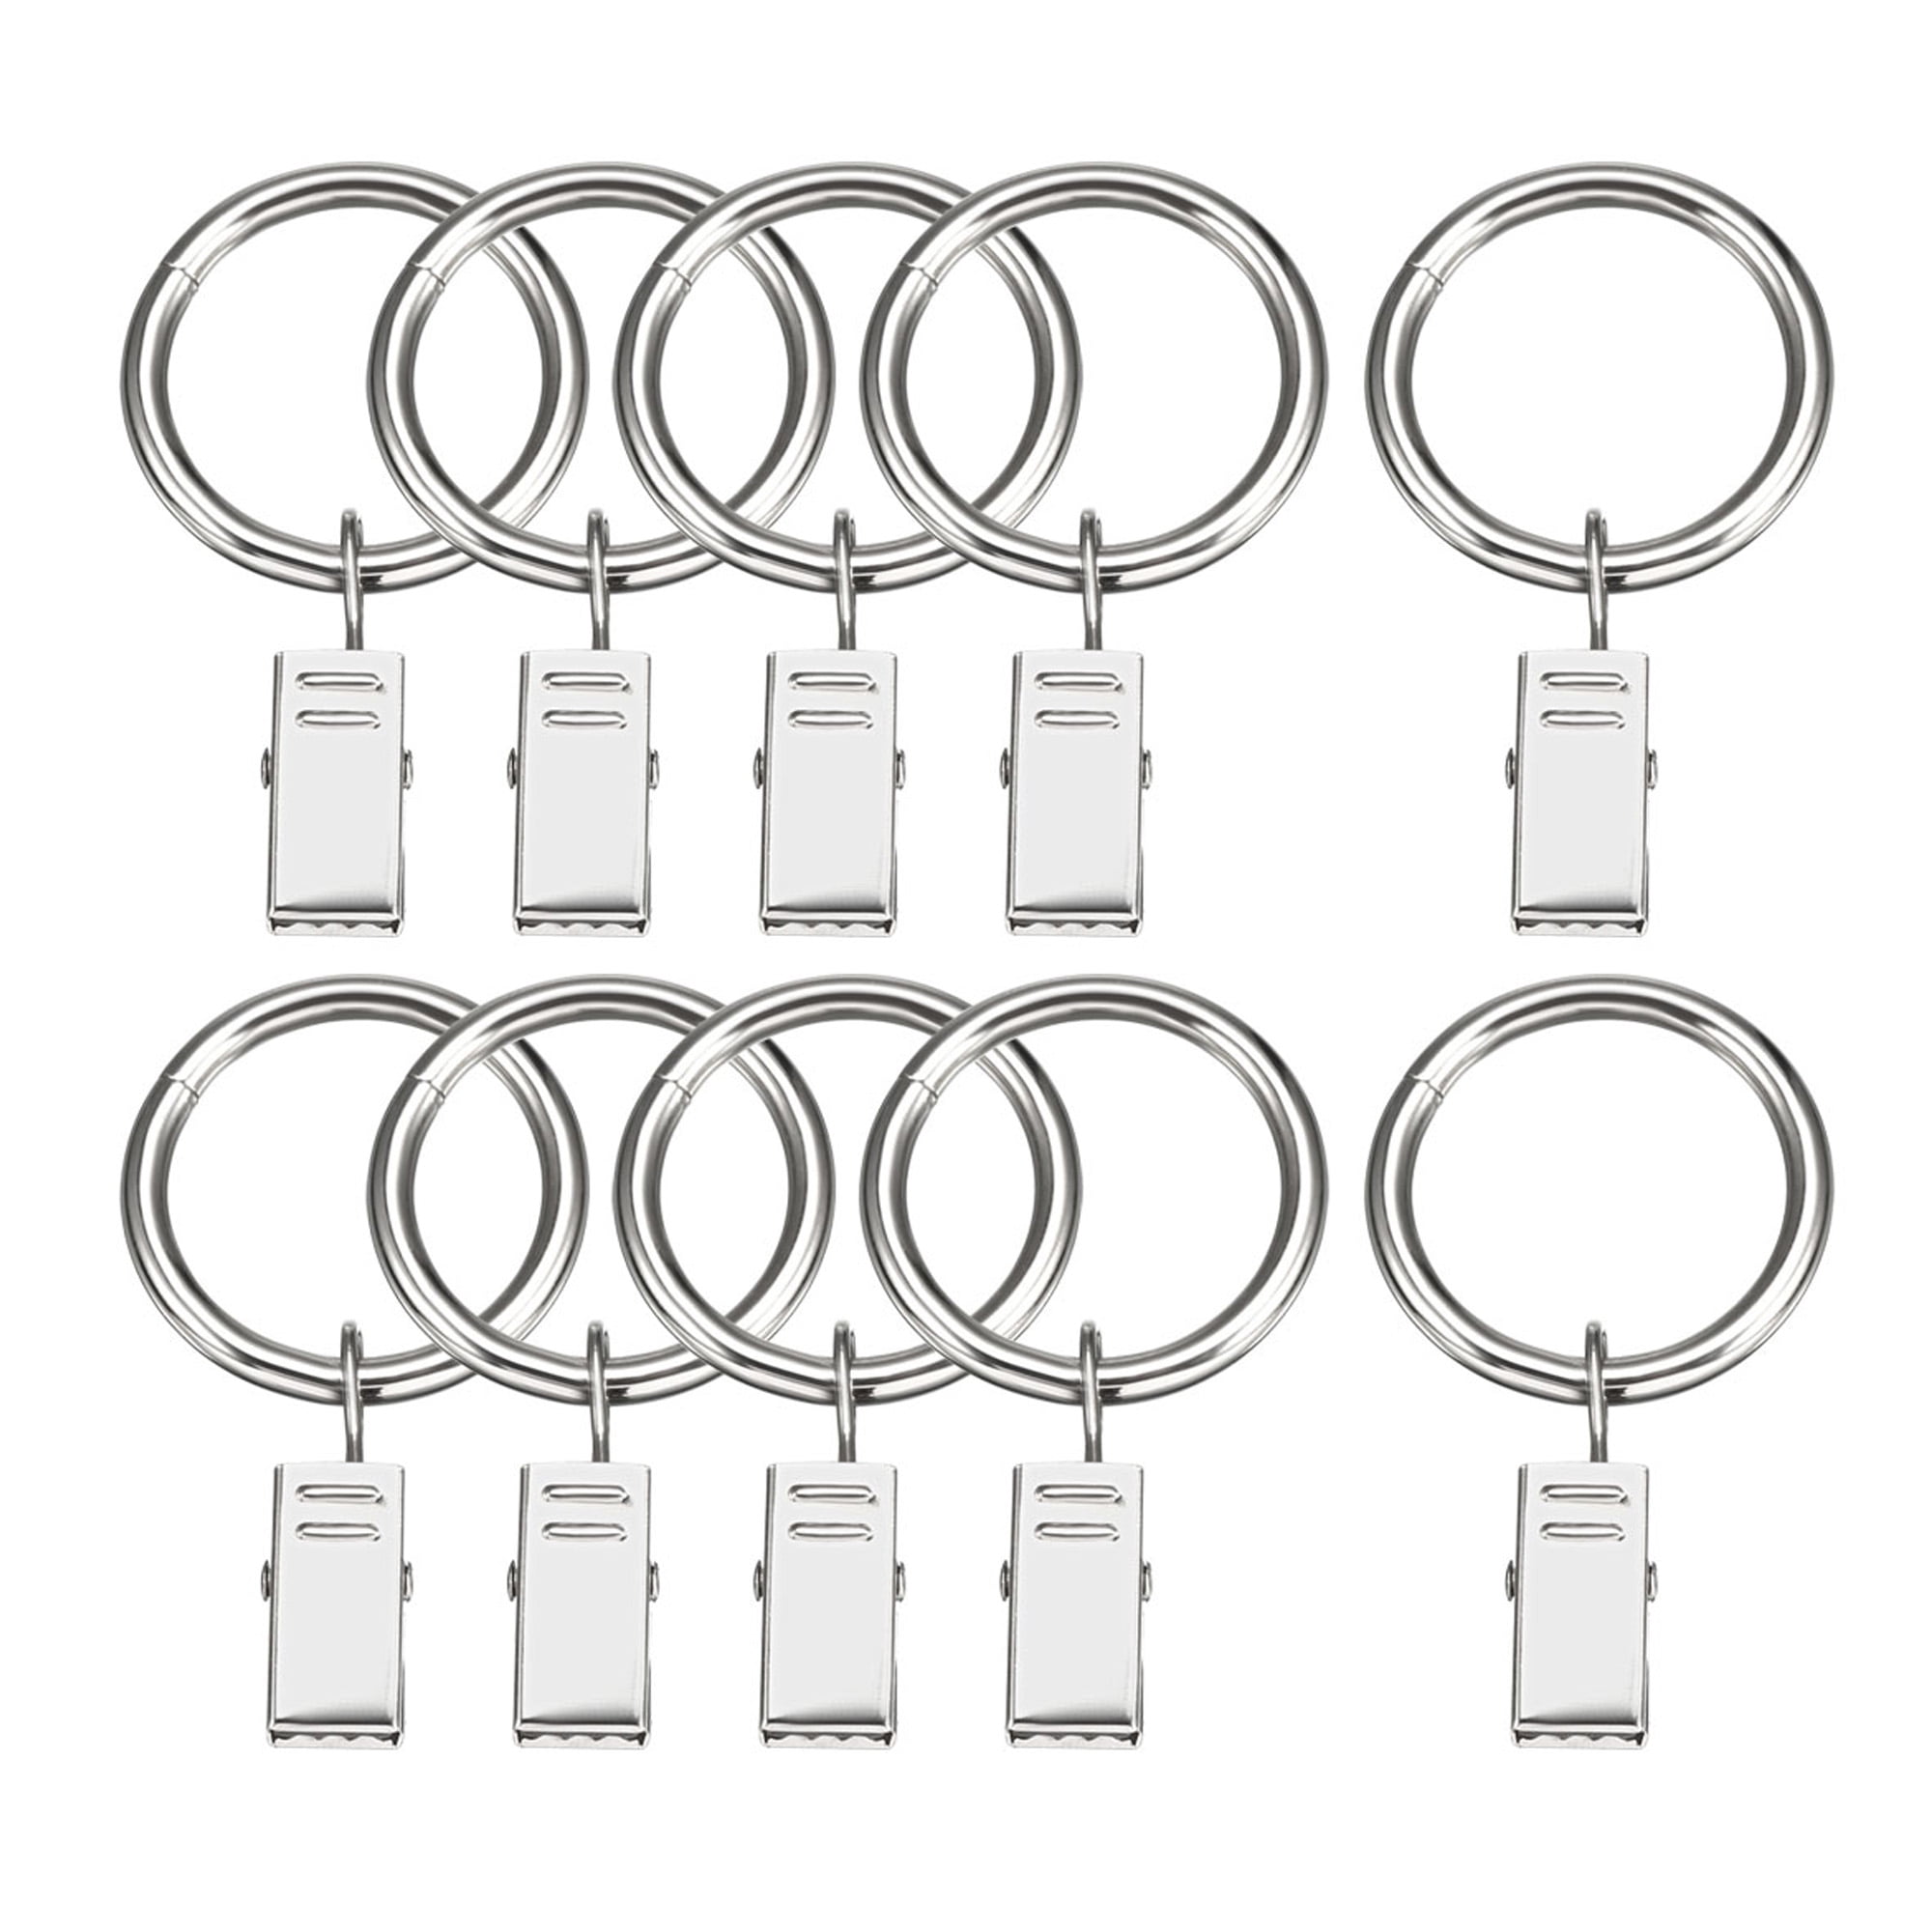 VEGCOO Metal Curtain Hooks, 35 Pcs Black Shower Curtain Rings  32mm/1.26Inch, Curtain Clips with Rings for Curtain Rods No Drilling,  Curtain Rings for